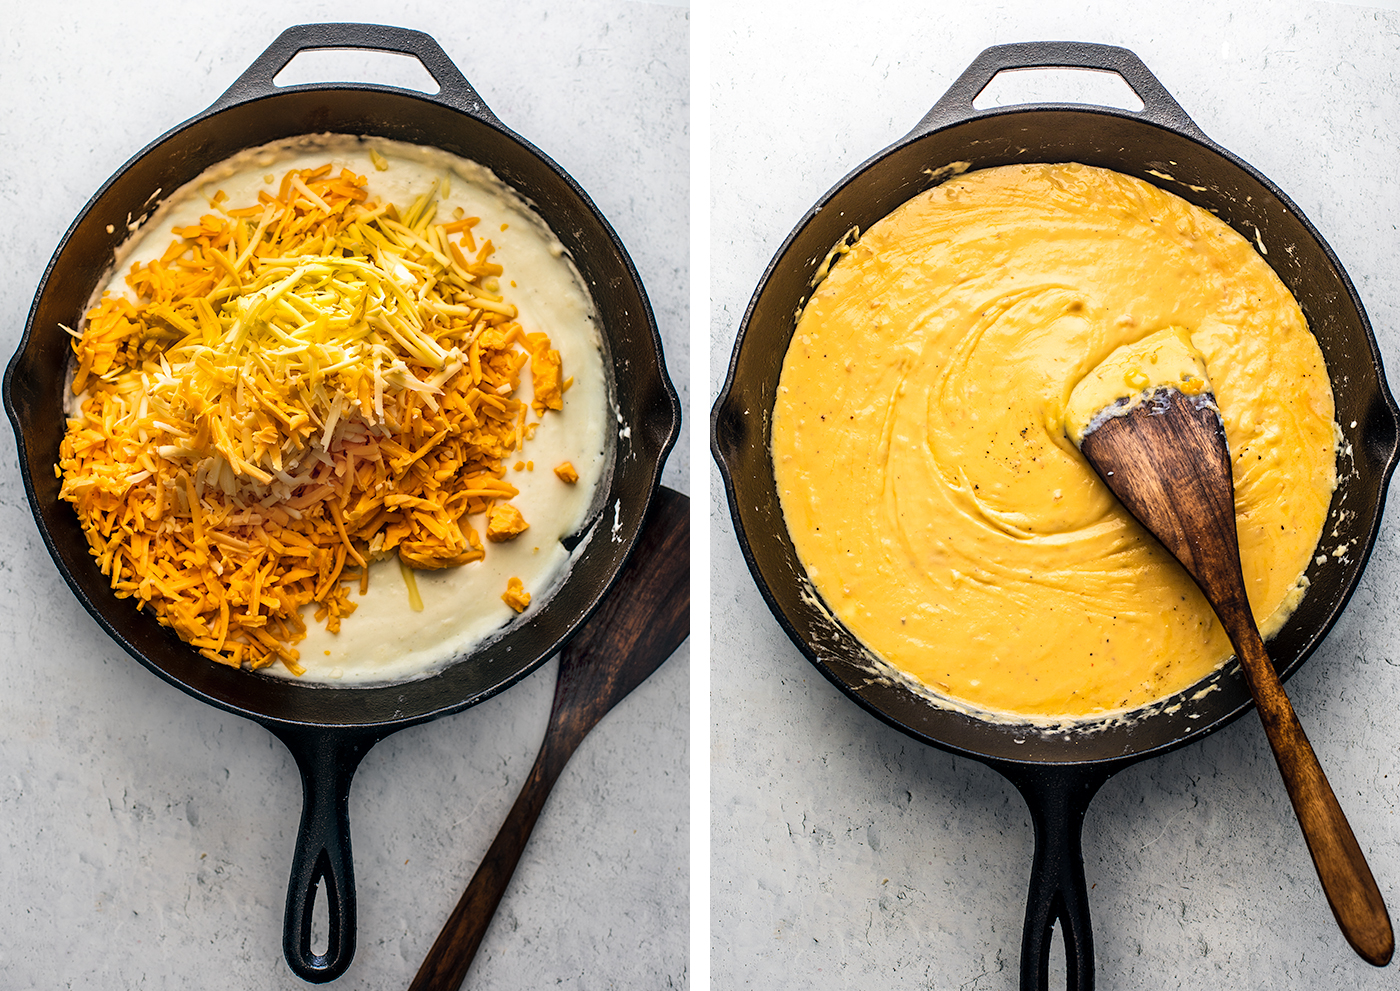 Left: Grated cheese piled into skillet; Right: skillet full of velvety cheese sauce.